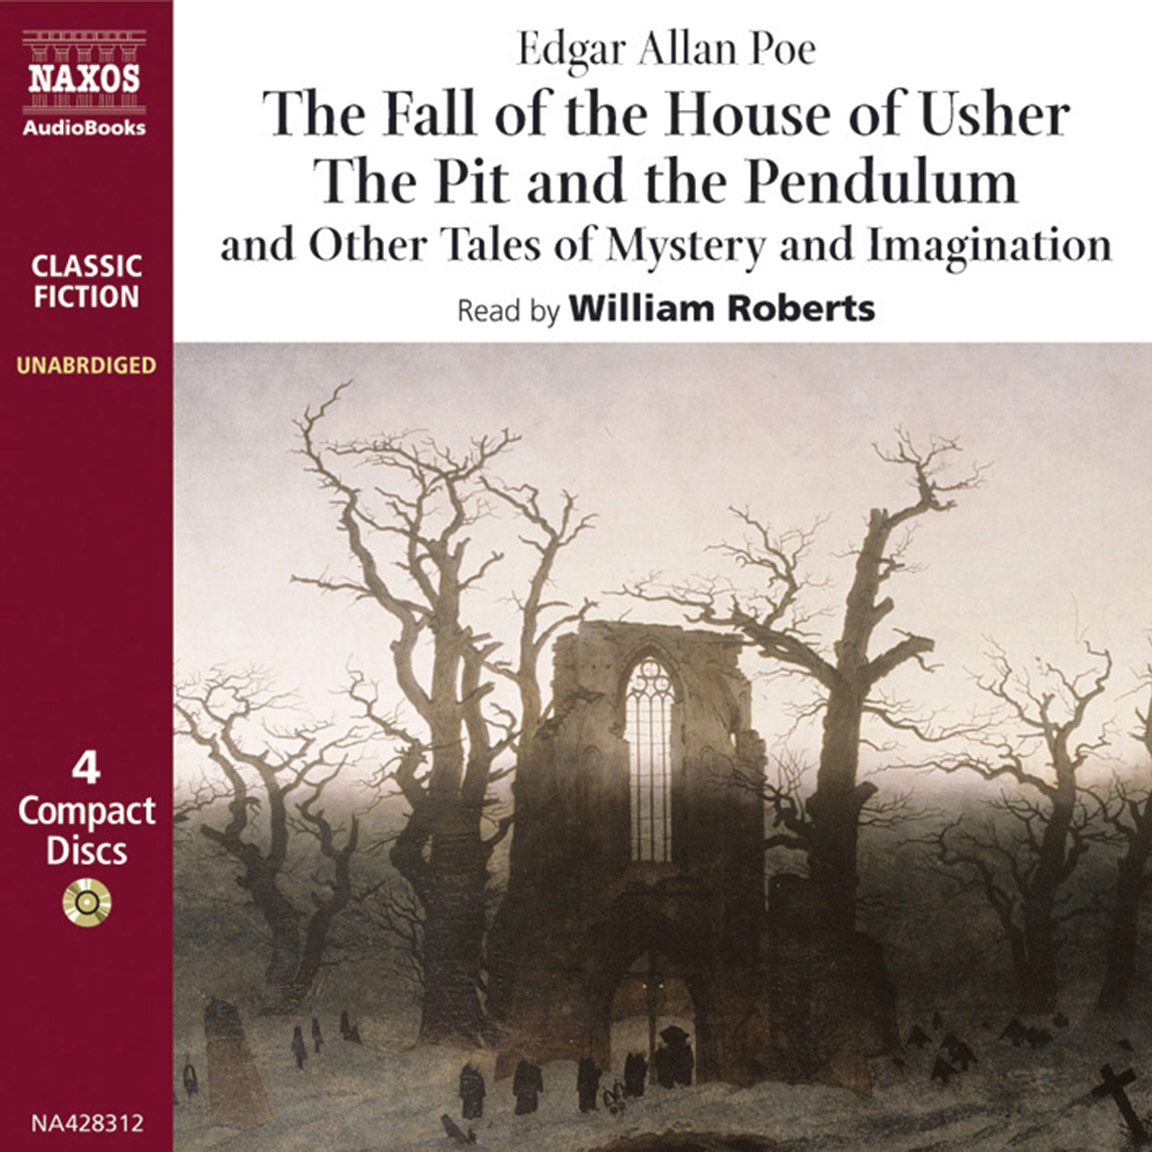 Read the fall of the house of usher